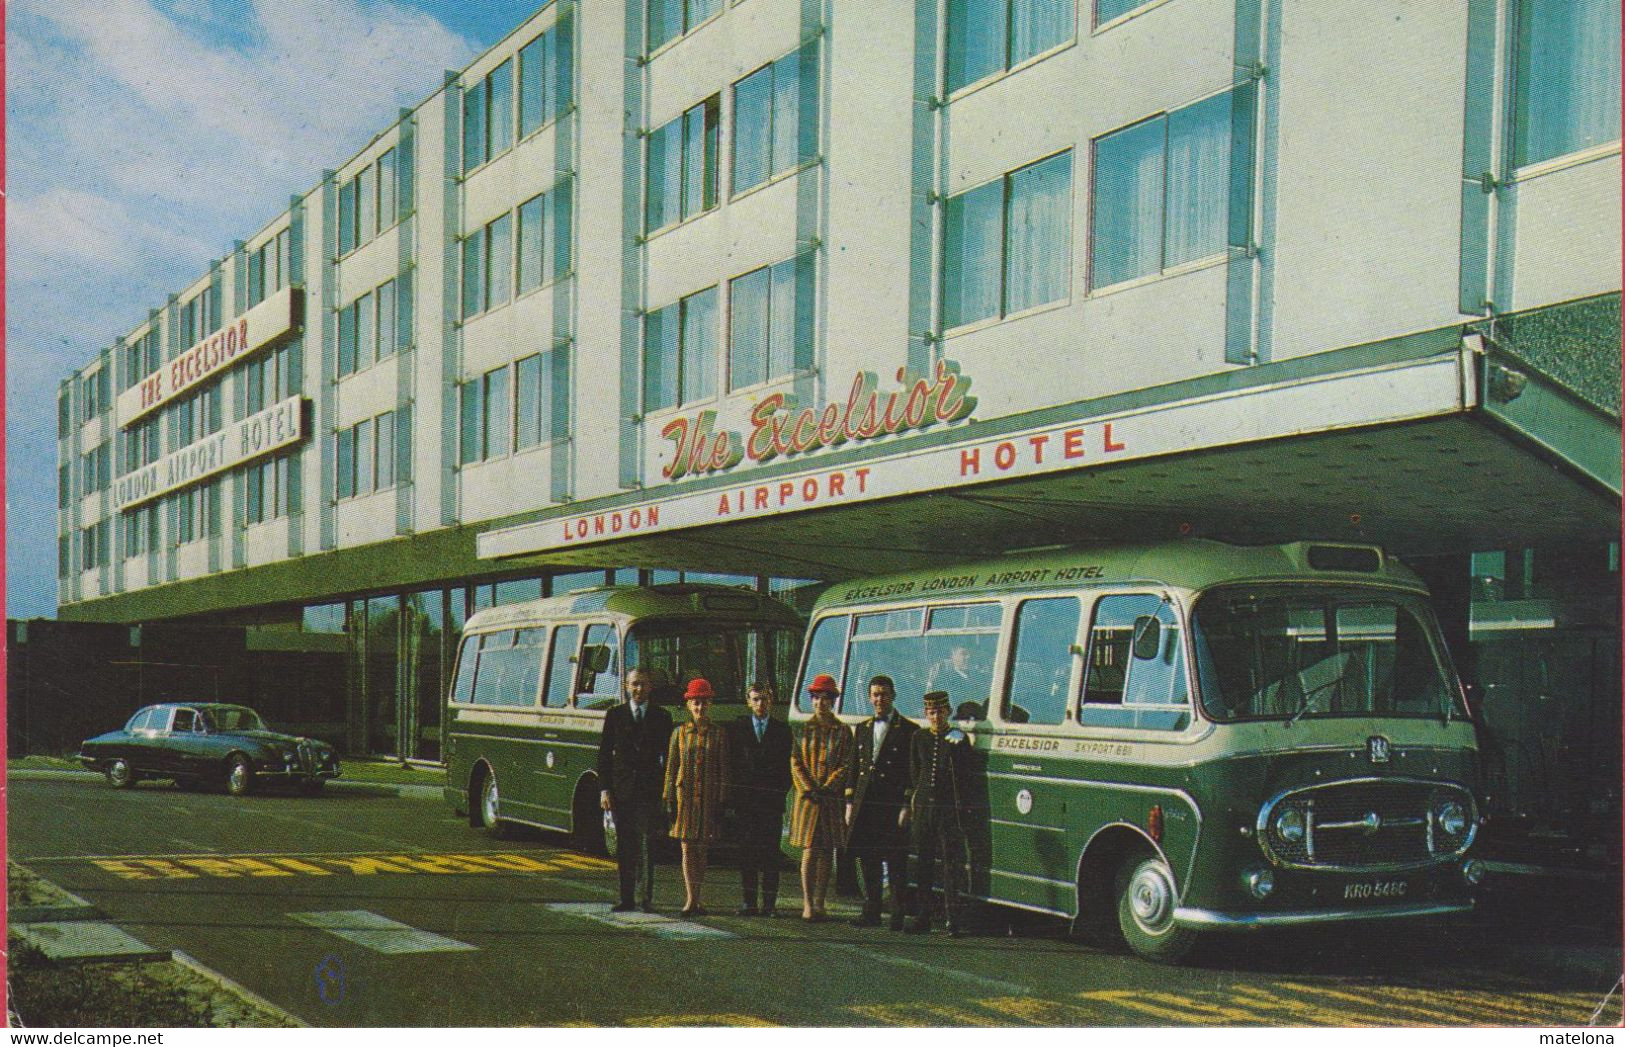 ROYAUME-UNI ANGLETERRE MIDDLESEX WEST DRAYTON THE EXCELSIOR LONDON AIRPORT HOTEL BATH ROAD BUS CAR - Middlesex